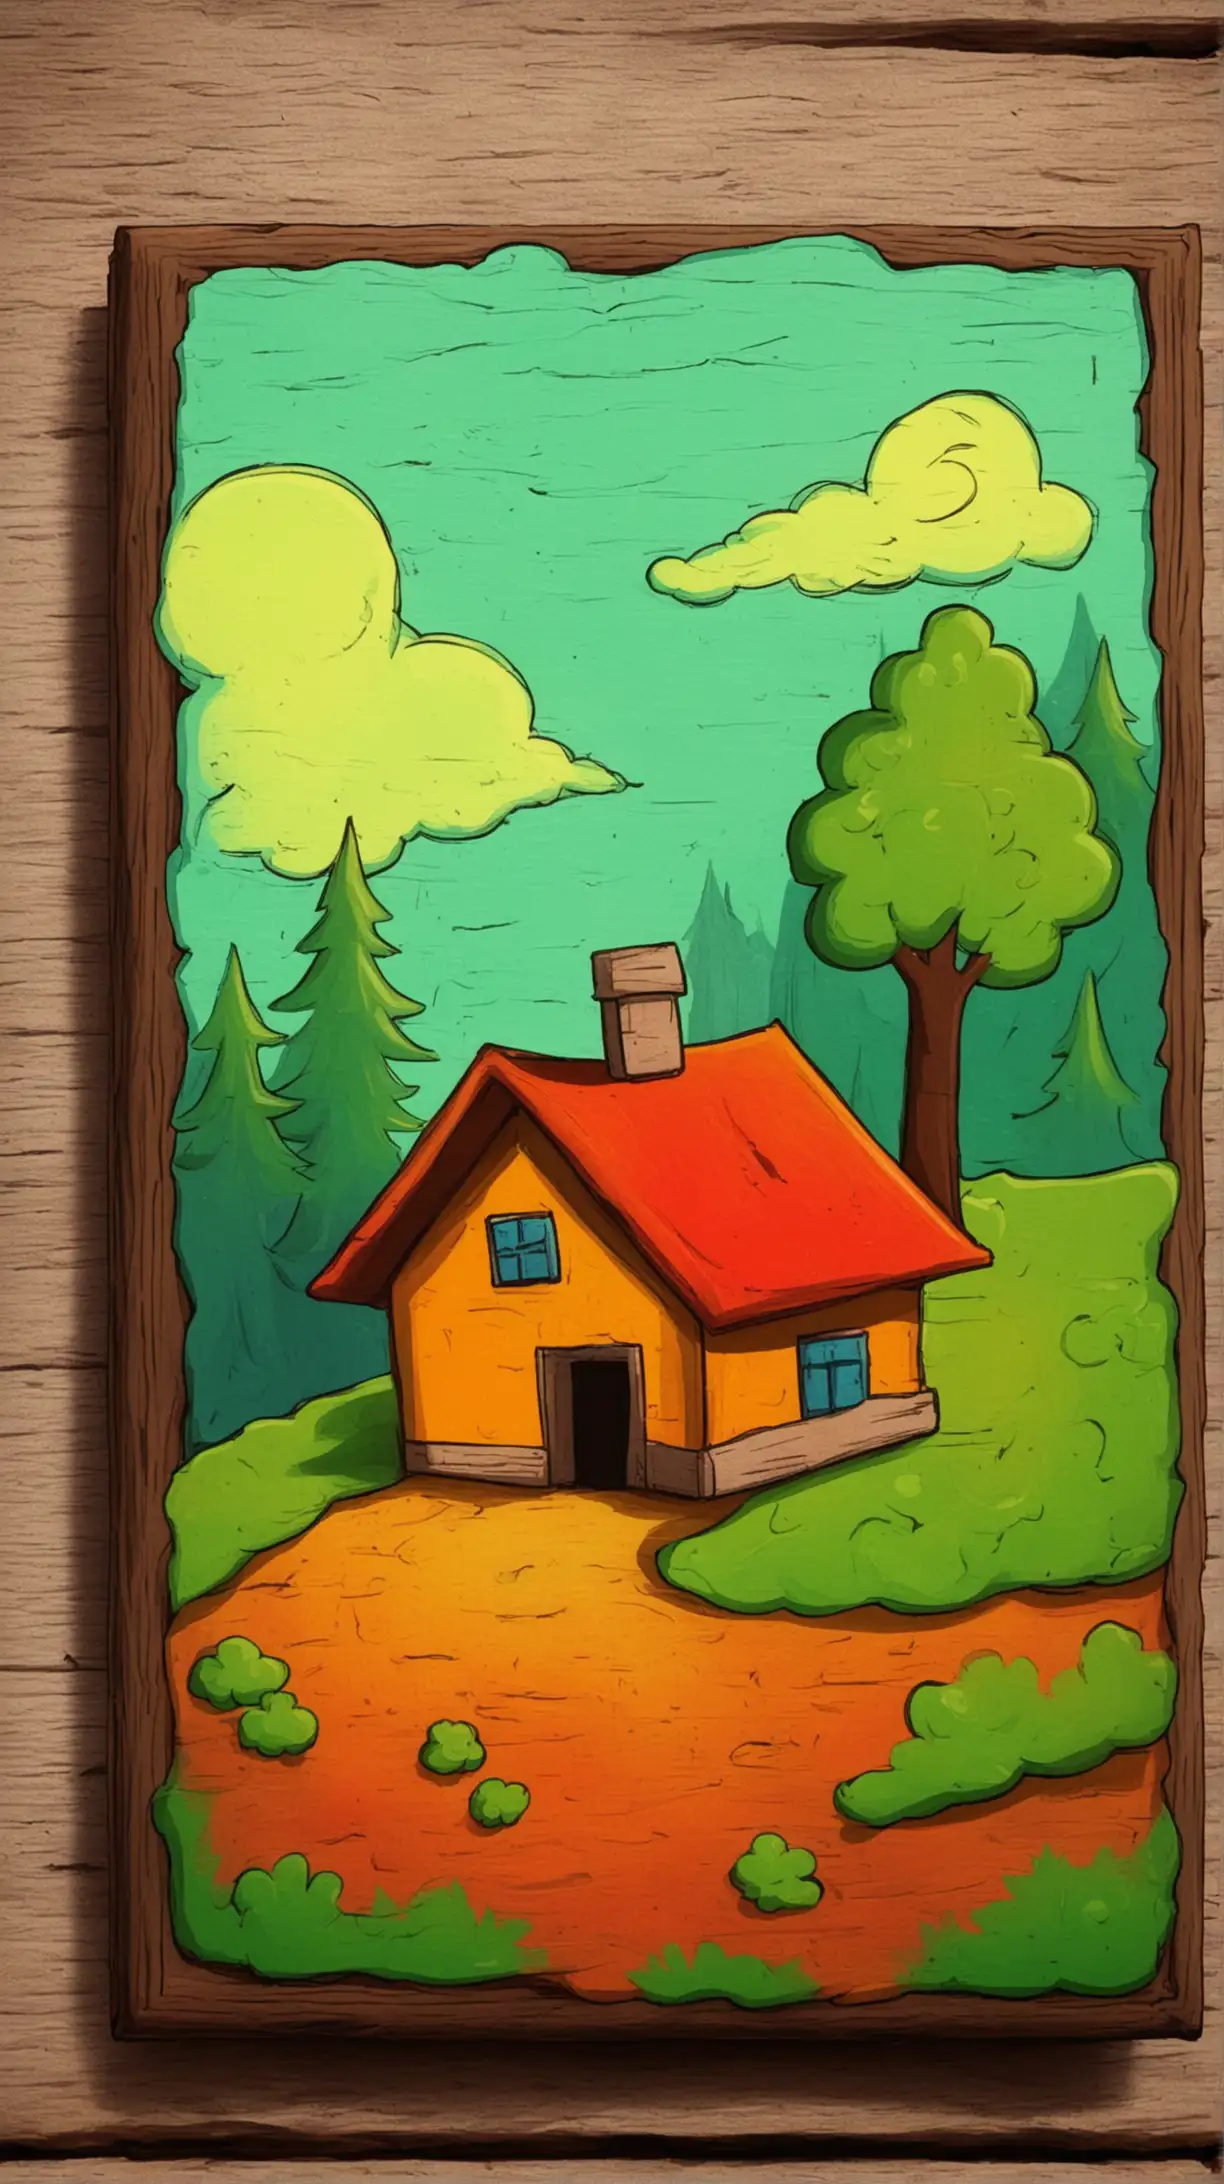 Colorful Cartoon Painting of a Rustic Scene